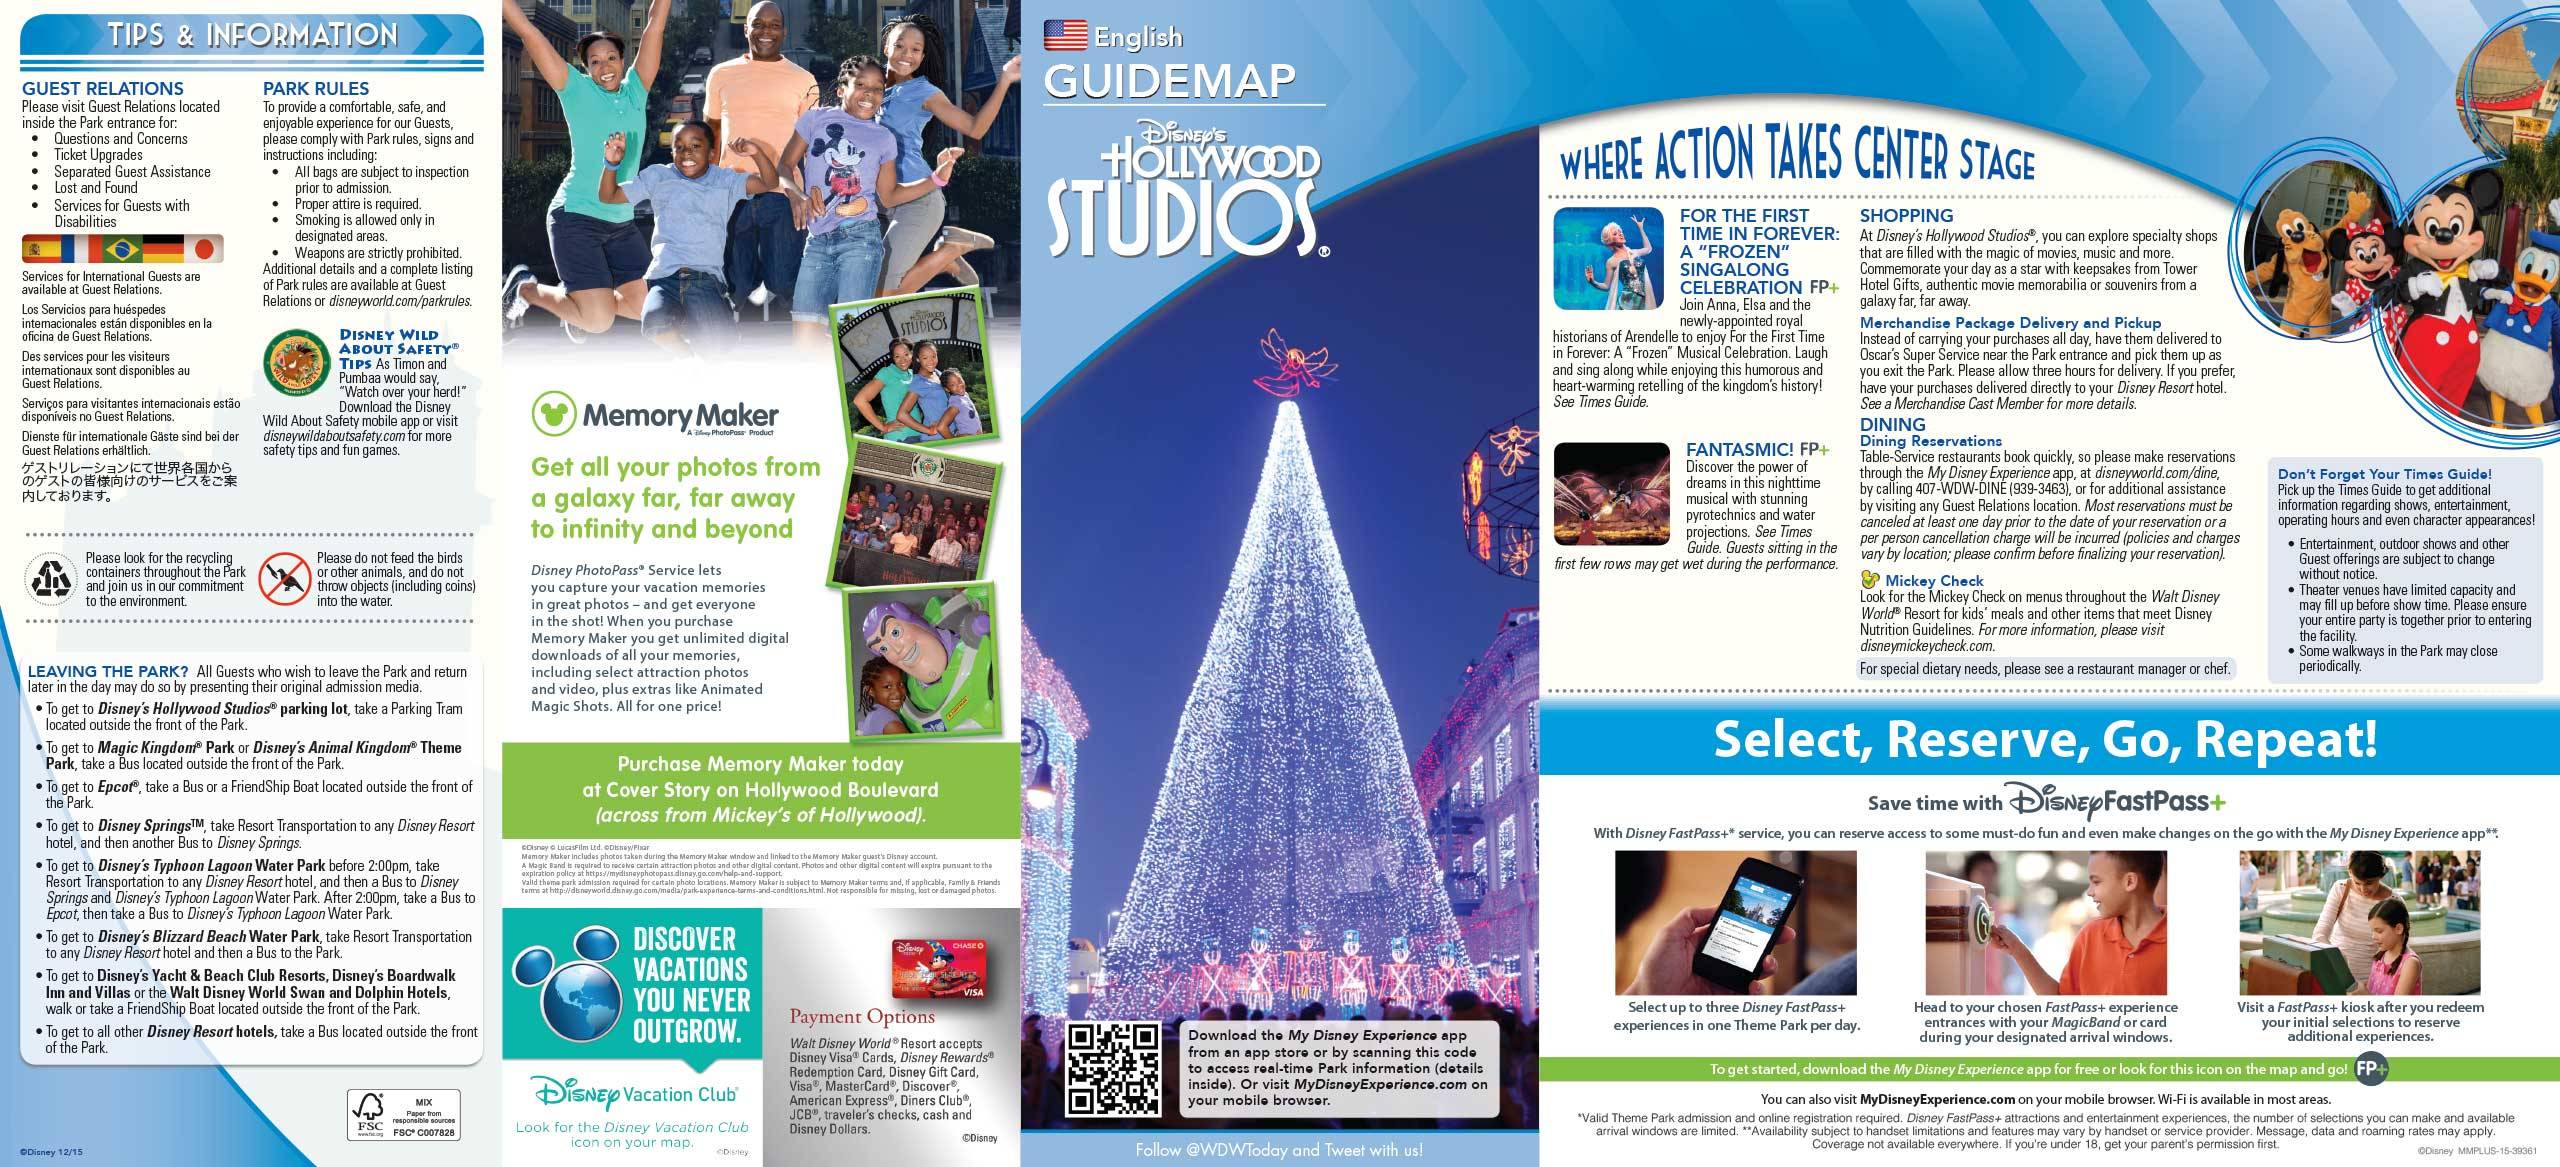 Disney's Hollywood Studios Guide Map December 2015 - Front